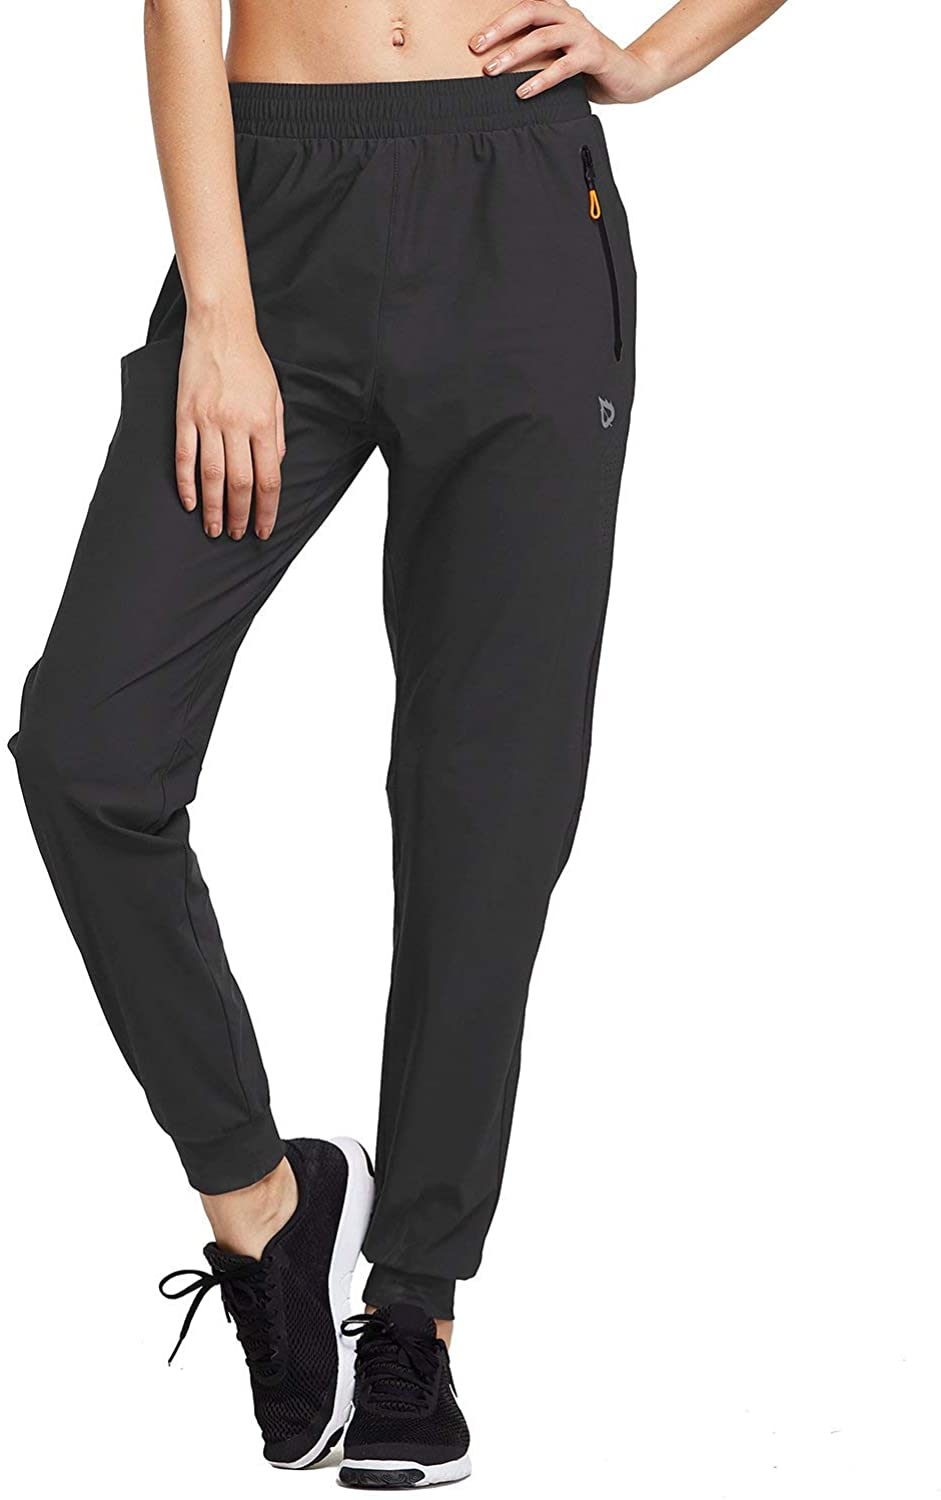 BALEAF Women's 7/8 High Wasited Running Pants Lightweight Athletic Sport Jogger Pants Quick Dry 